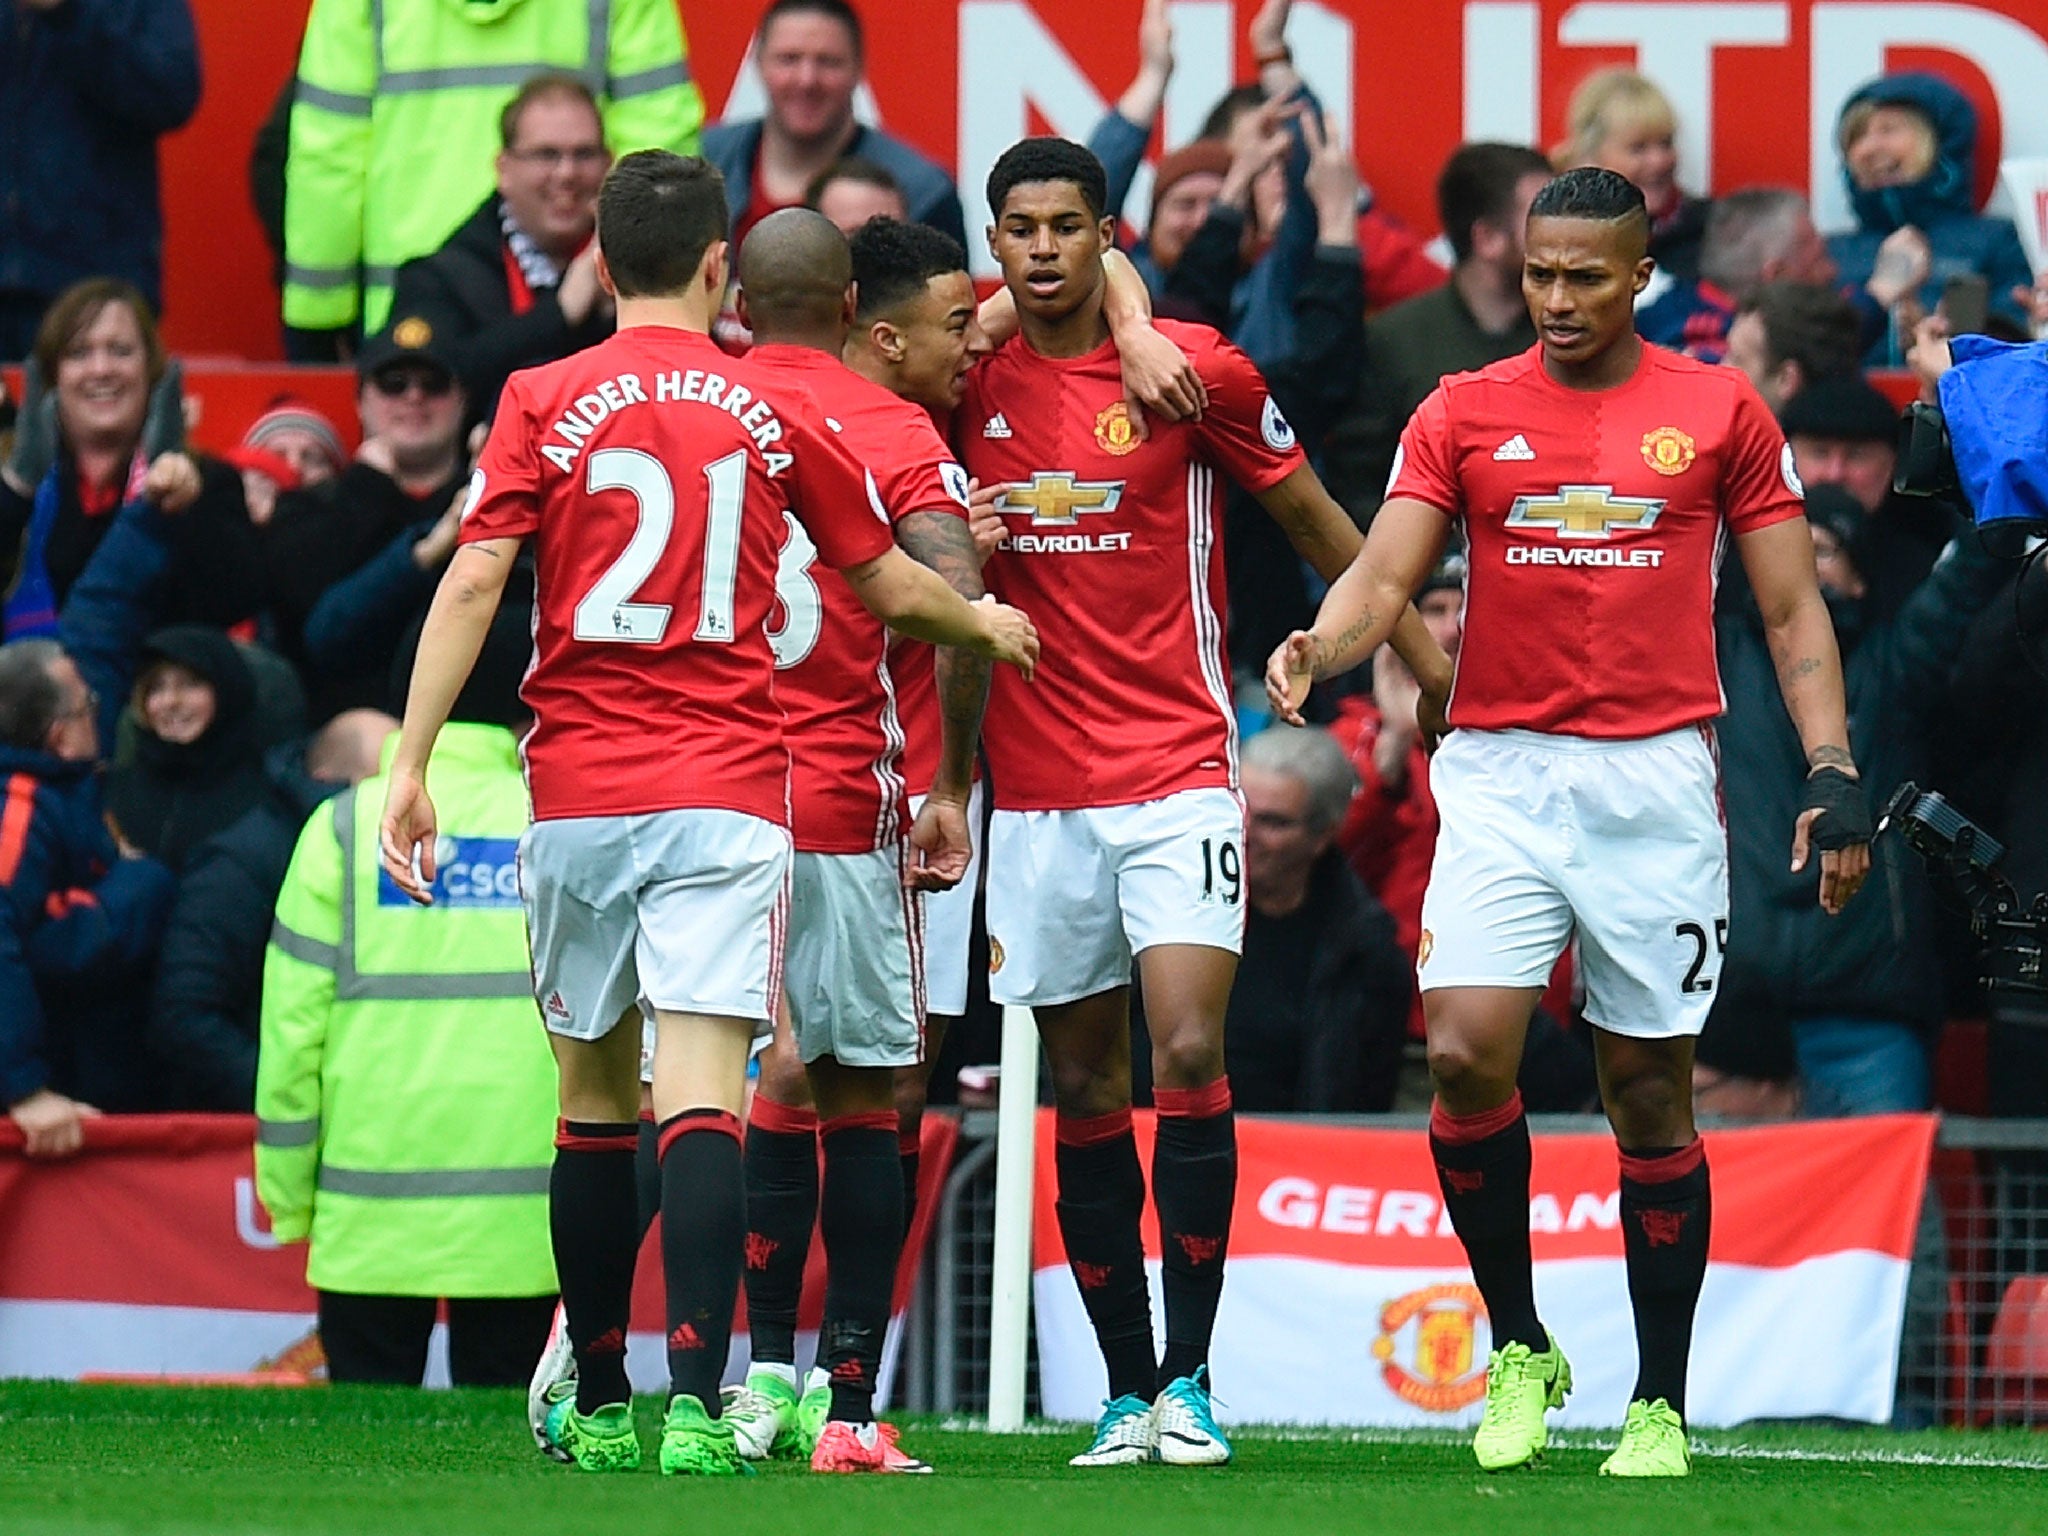 Manchester United produced a masterful display to defeat the Premier League leaders